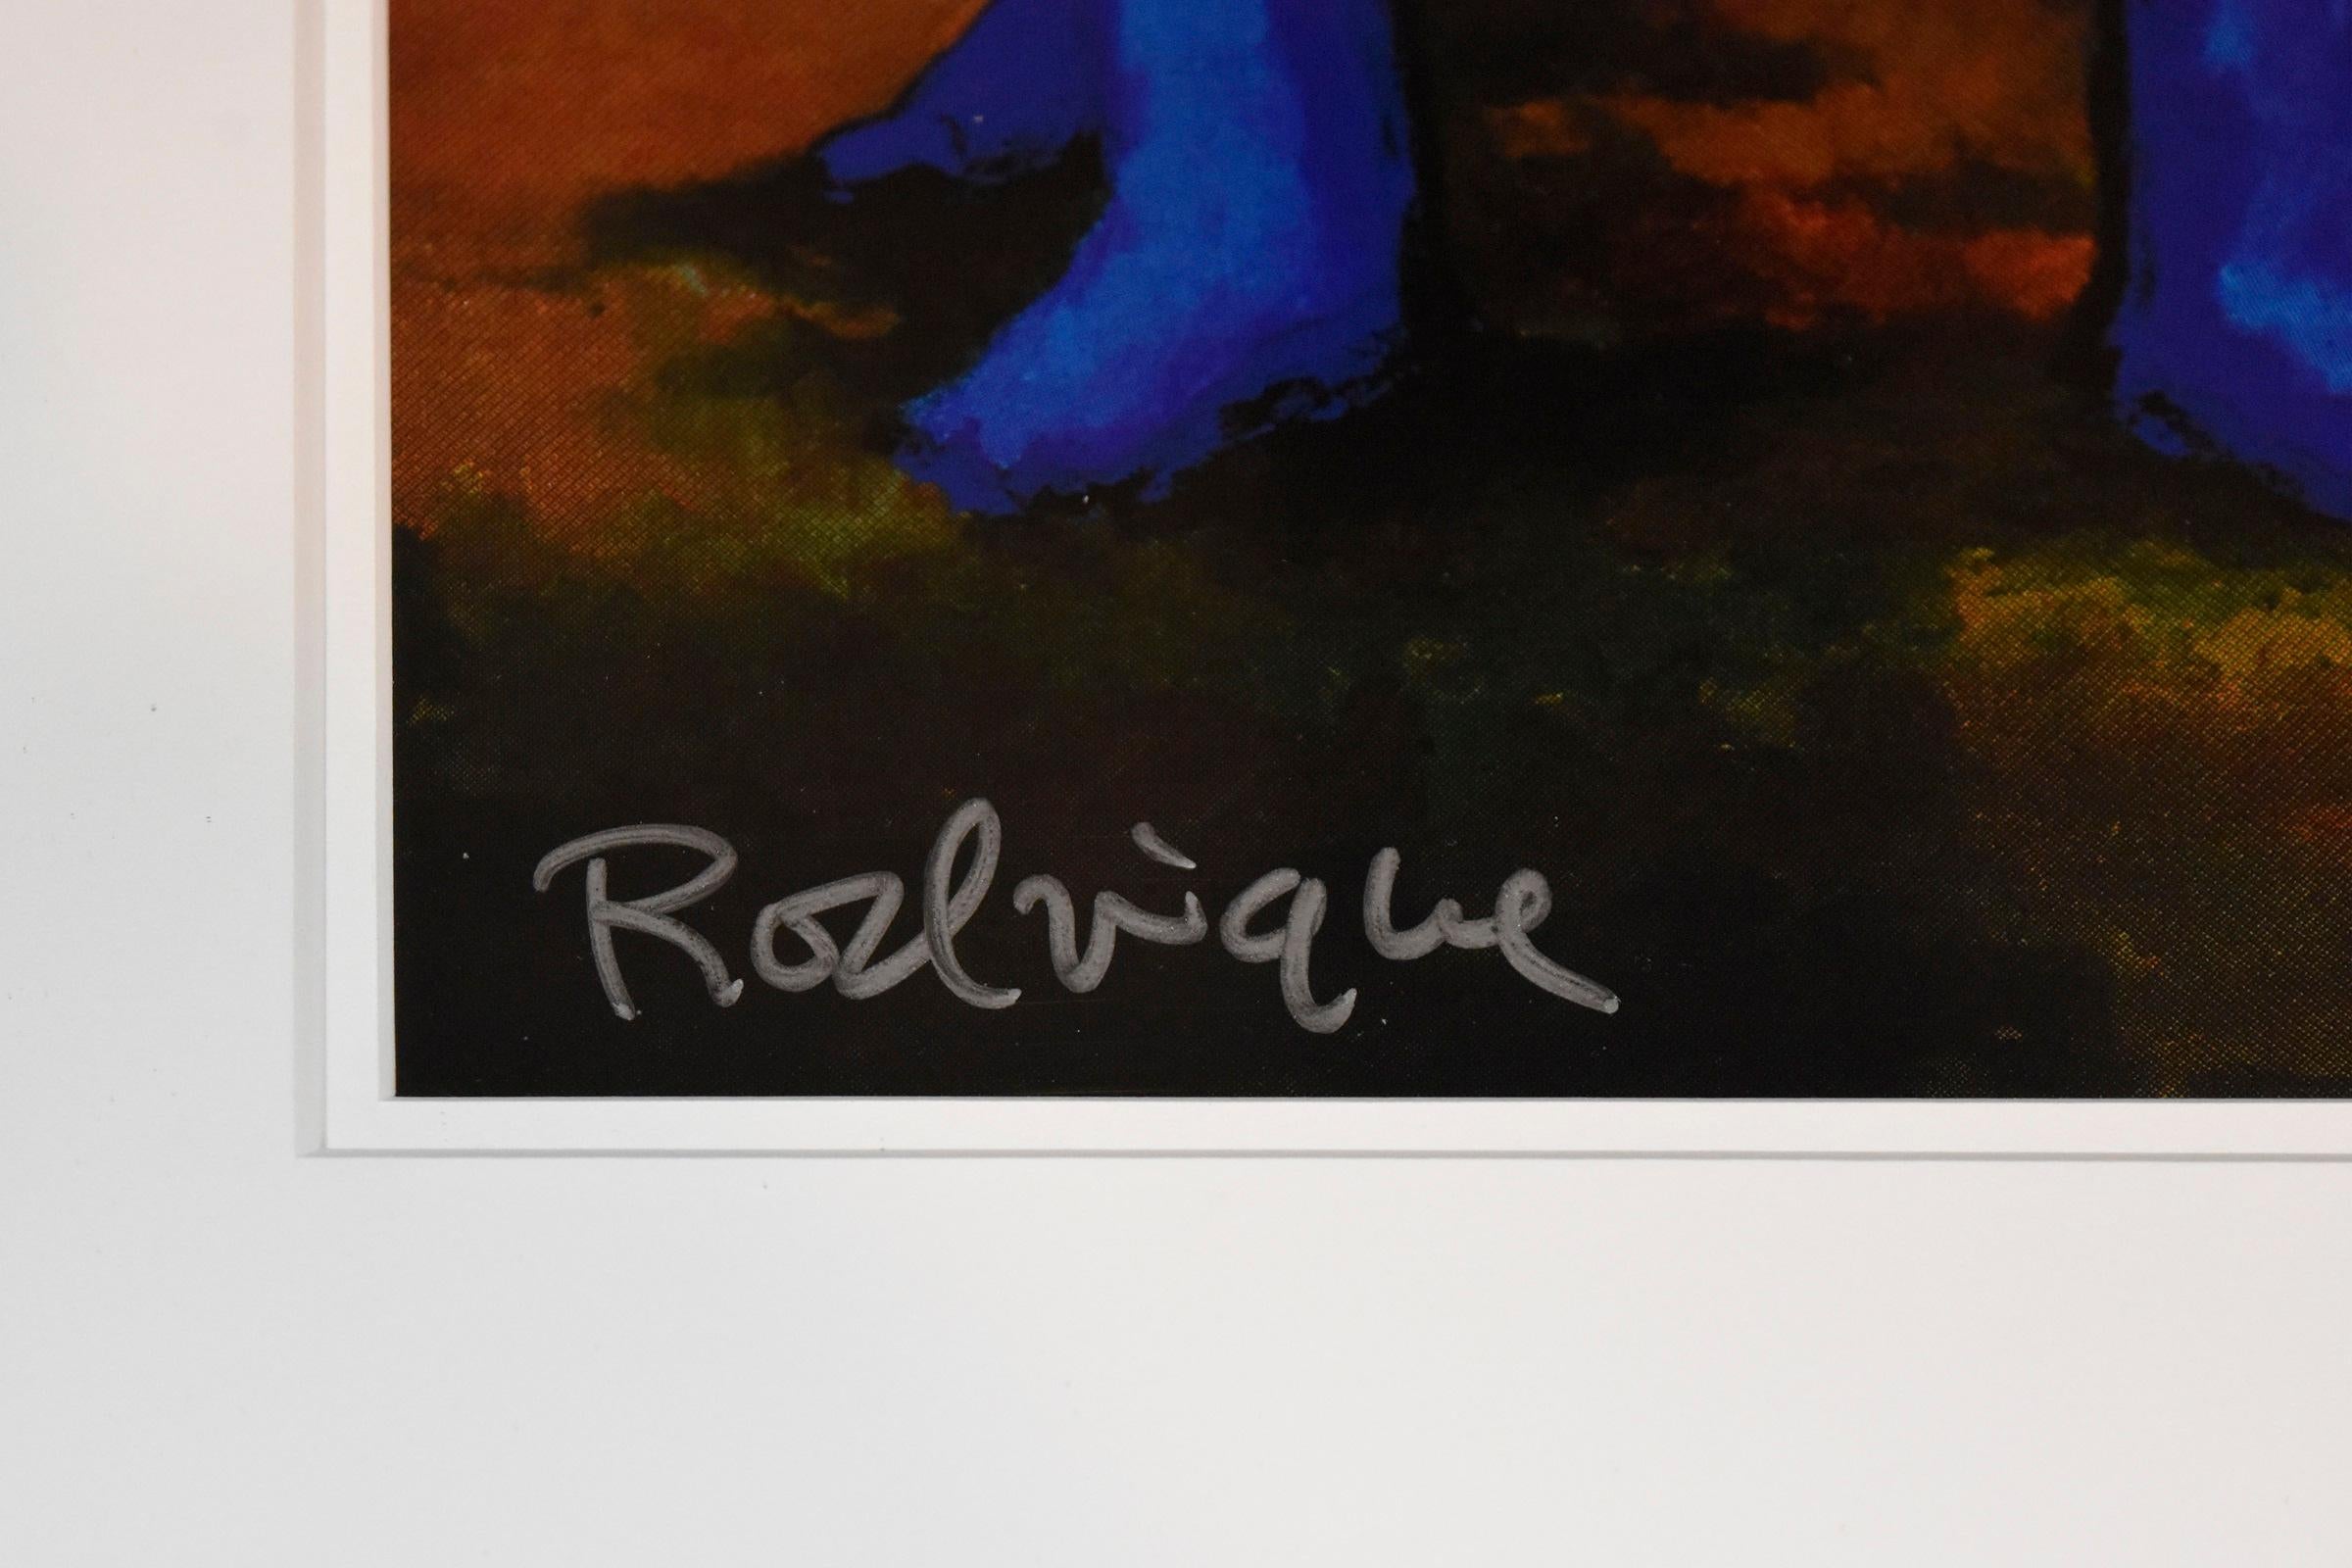 Artist:  George Rodrigue
Title:  Blue Dog “Takin' Care of Business”
Medium:  Silkscreen	
Date:  2000
Edition:  350
Dimensions: 21 X 16”
Description:  Signed & F6ramed  
Condition:  Excellent 

